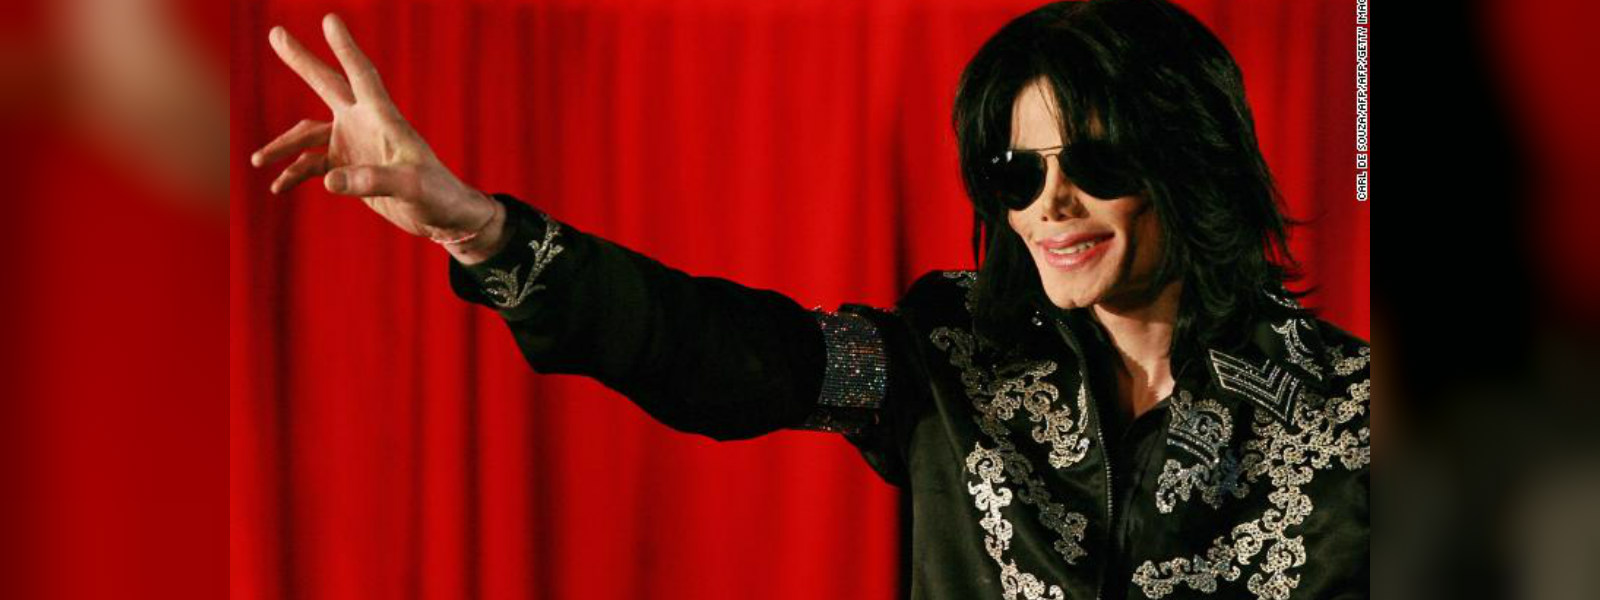 MJ's family lashes out on new documentary 